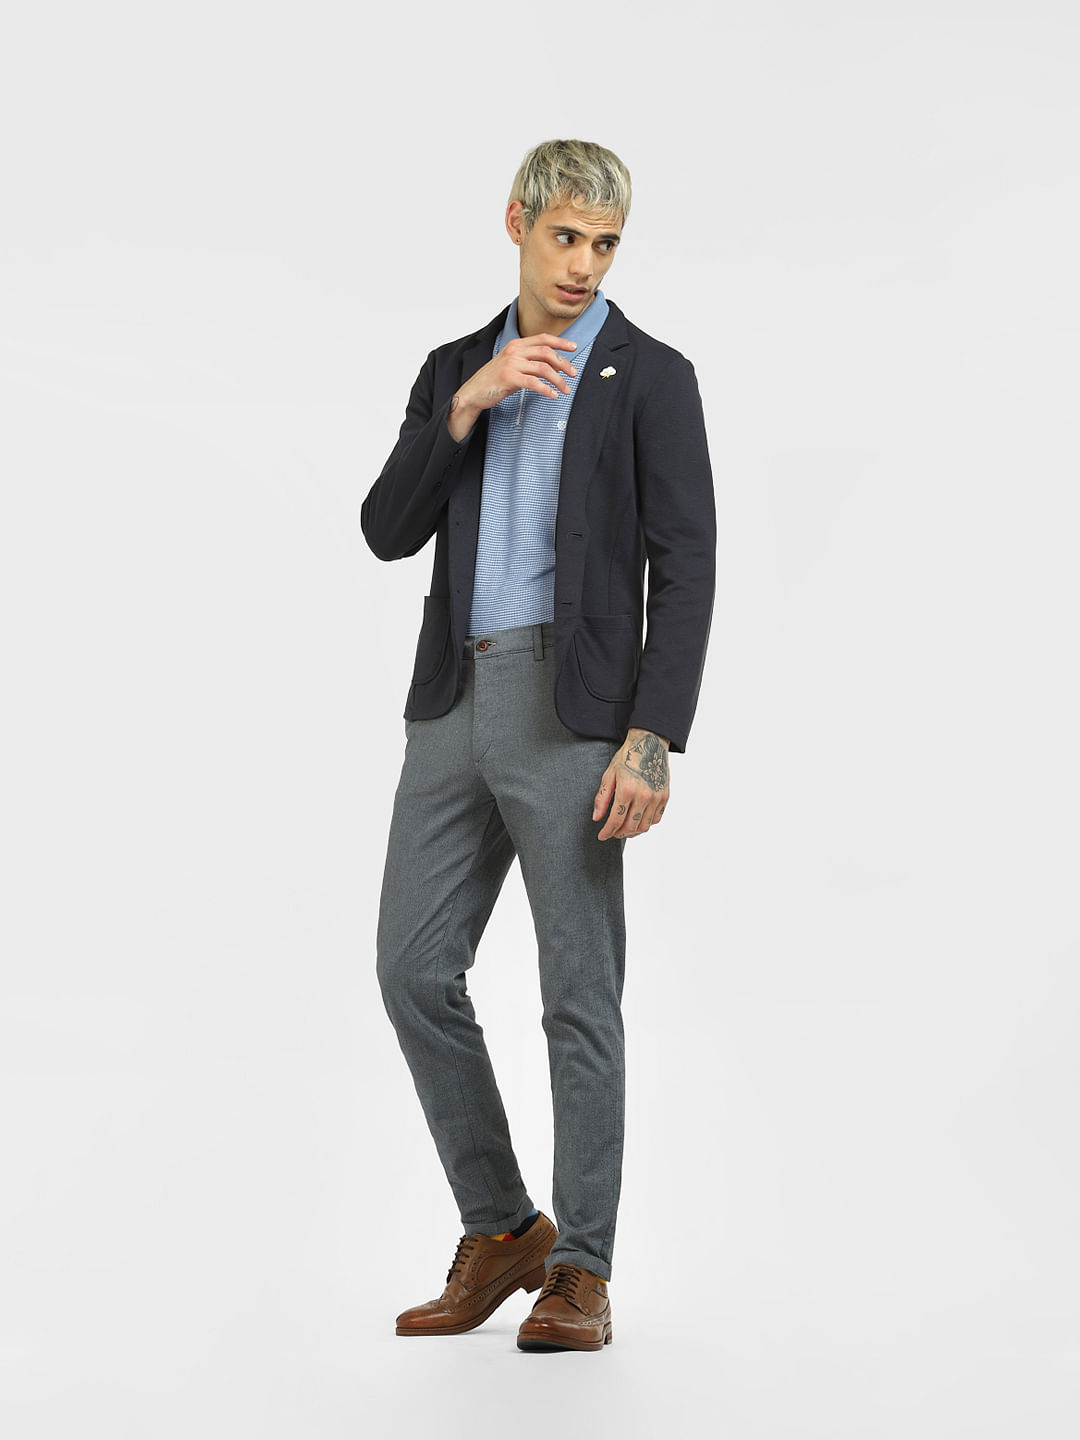 Buy Grey Formal and casual Everyday Pant online for men